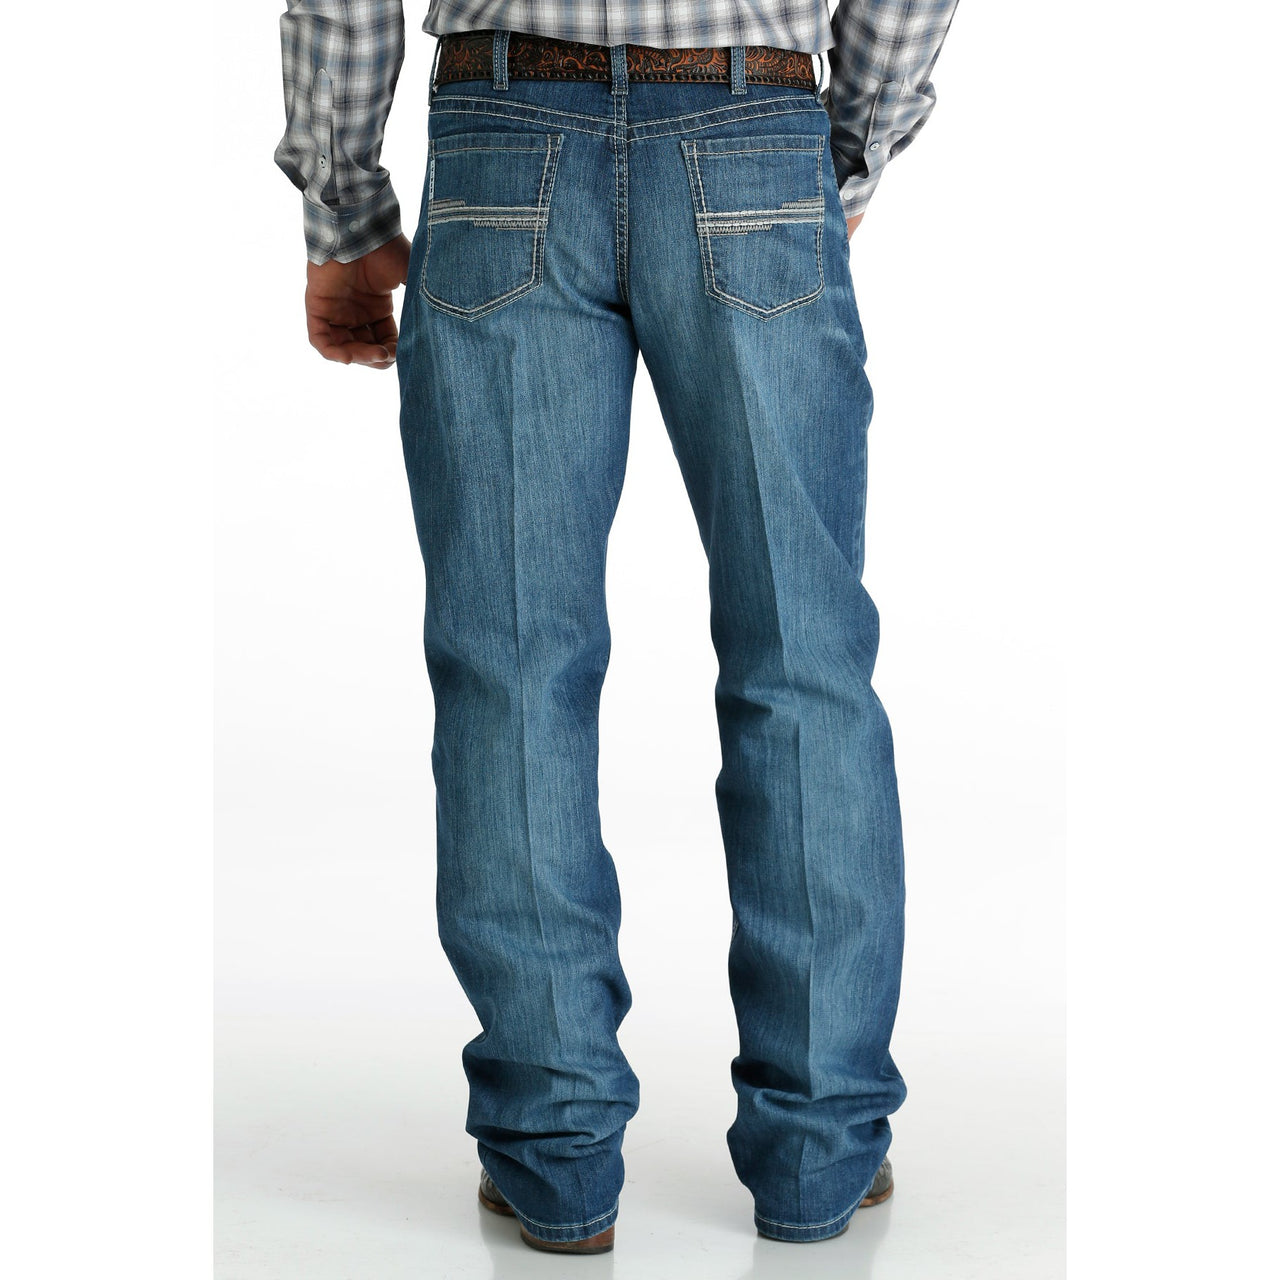 Cinch Men's White Label Mid Rise Relaxed Straight Jeans - Medium Stonewash